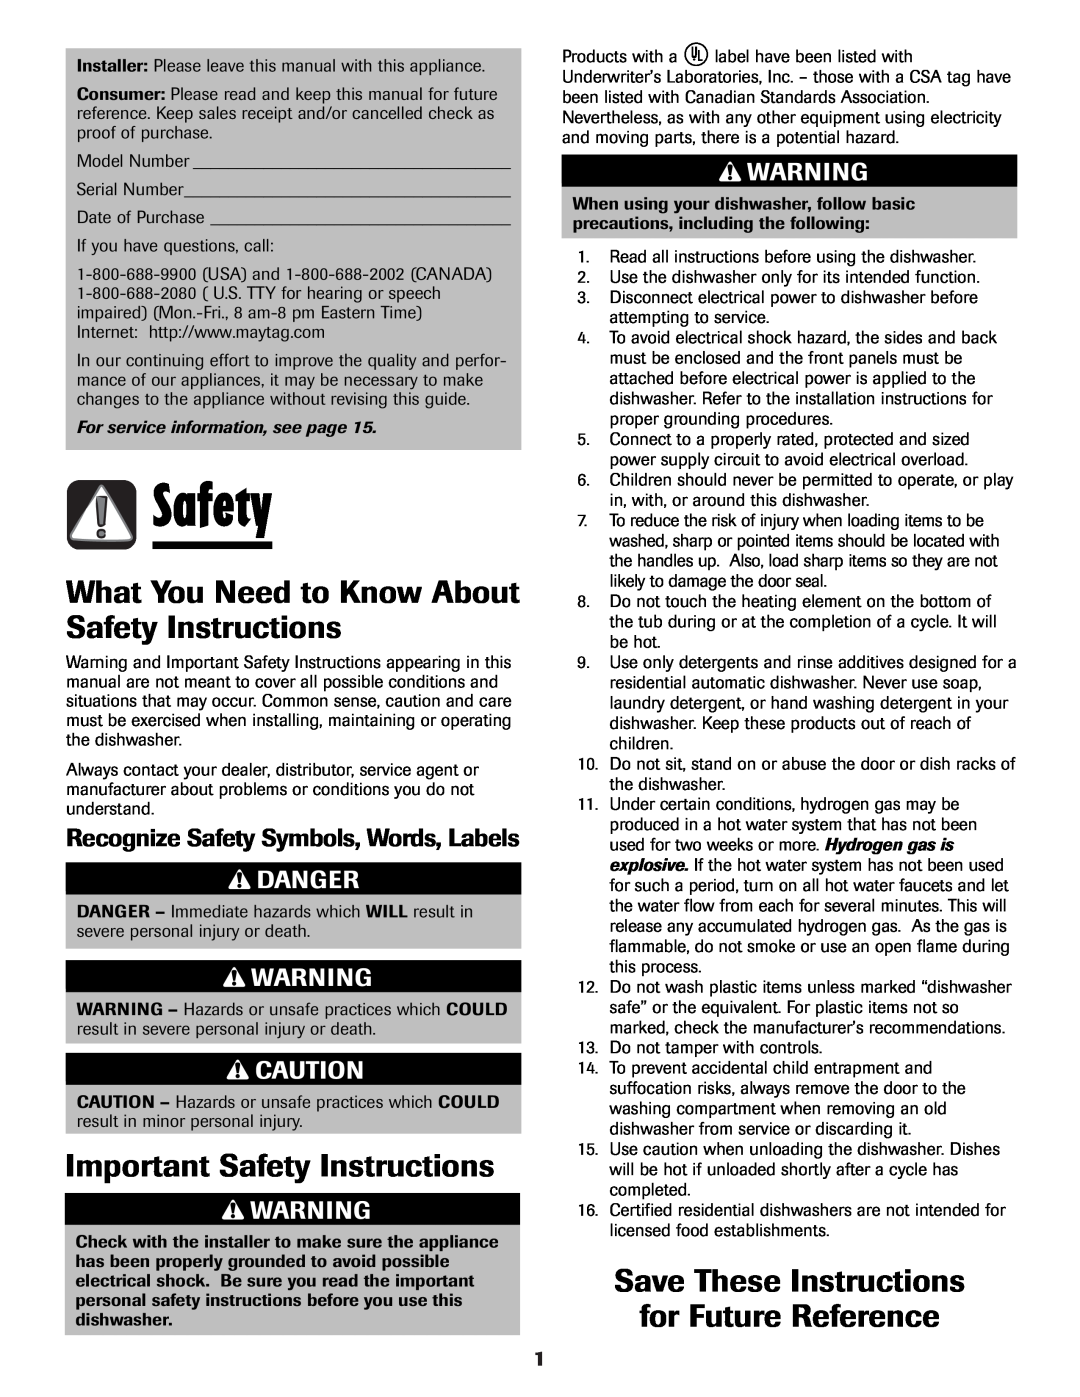 Maytag MDB-5 warranty What You Need to Know About Safety Instructions, Important Safety Instructions, Danger 